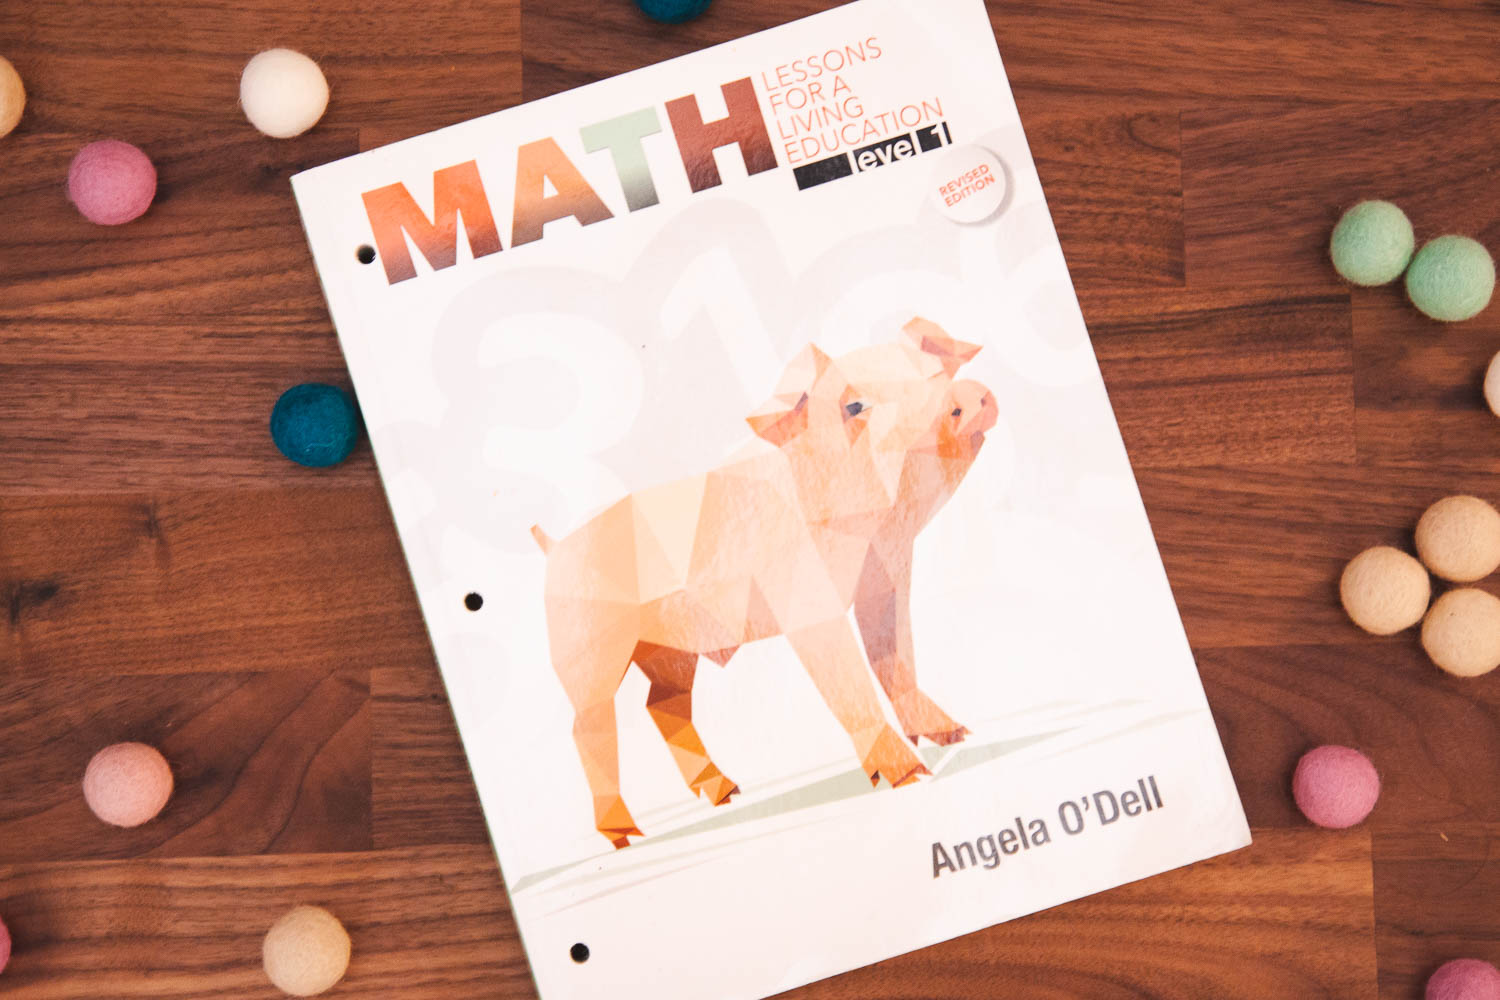 Our kindergarten homeschool curriculum choice for math is Math Lessons for a Living Education